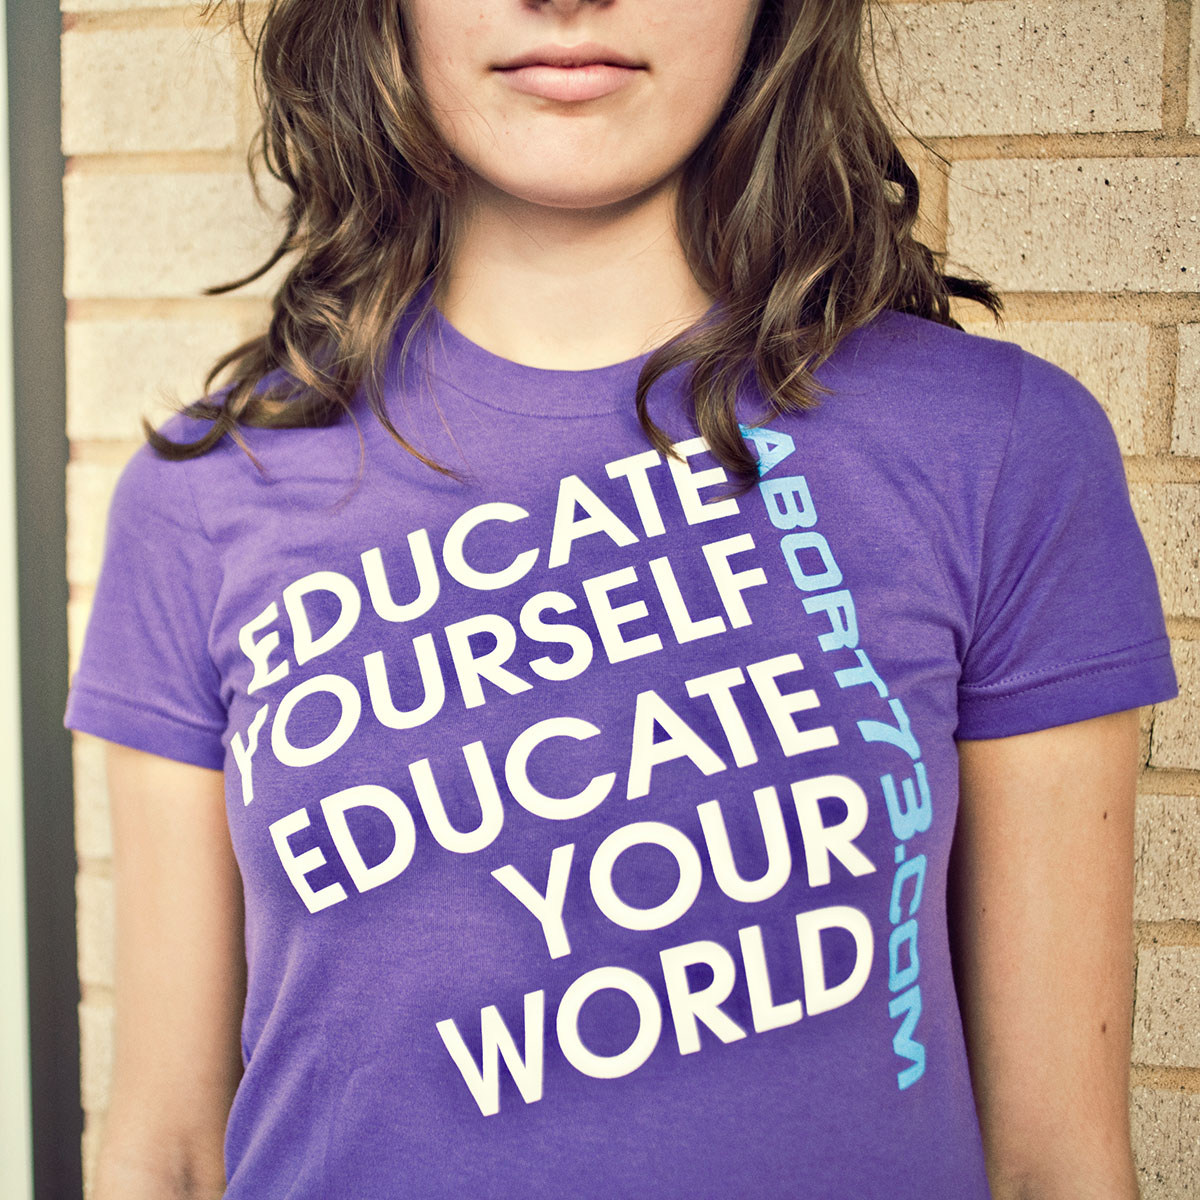 Educate Yourself. Educate Your World. (Abort73 Girls T-shirt)